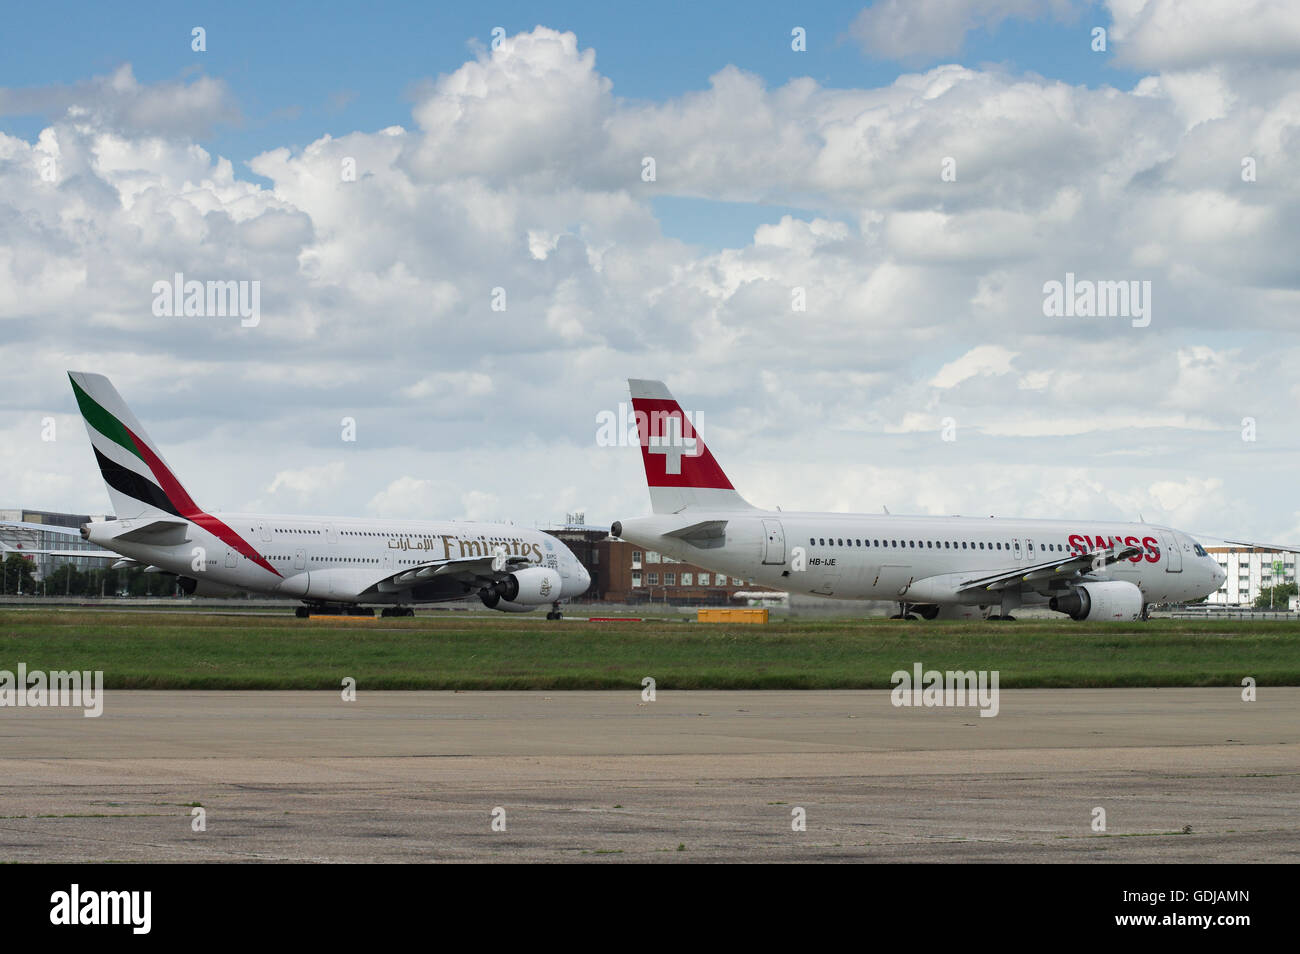 Swiss Airlines and Emirates taxiing next to each other at London Heathrow Airport Stock Photo